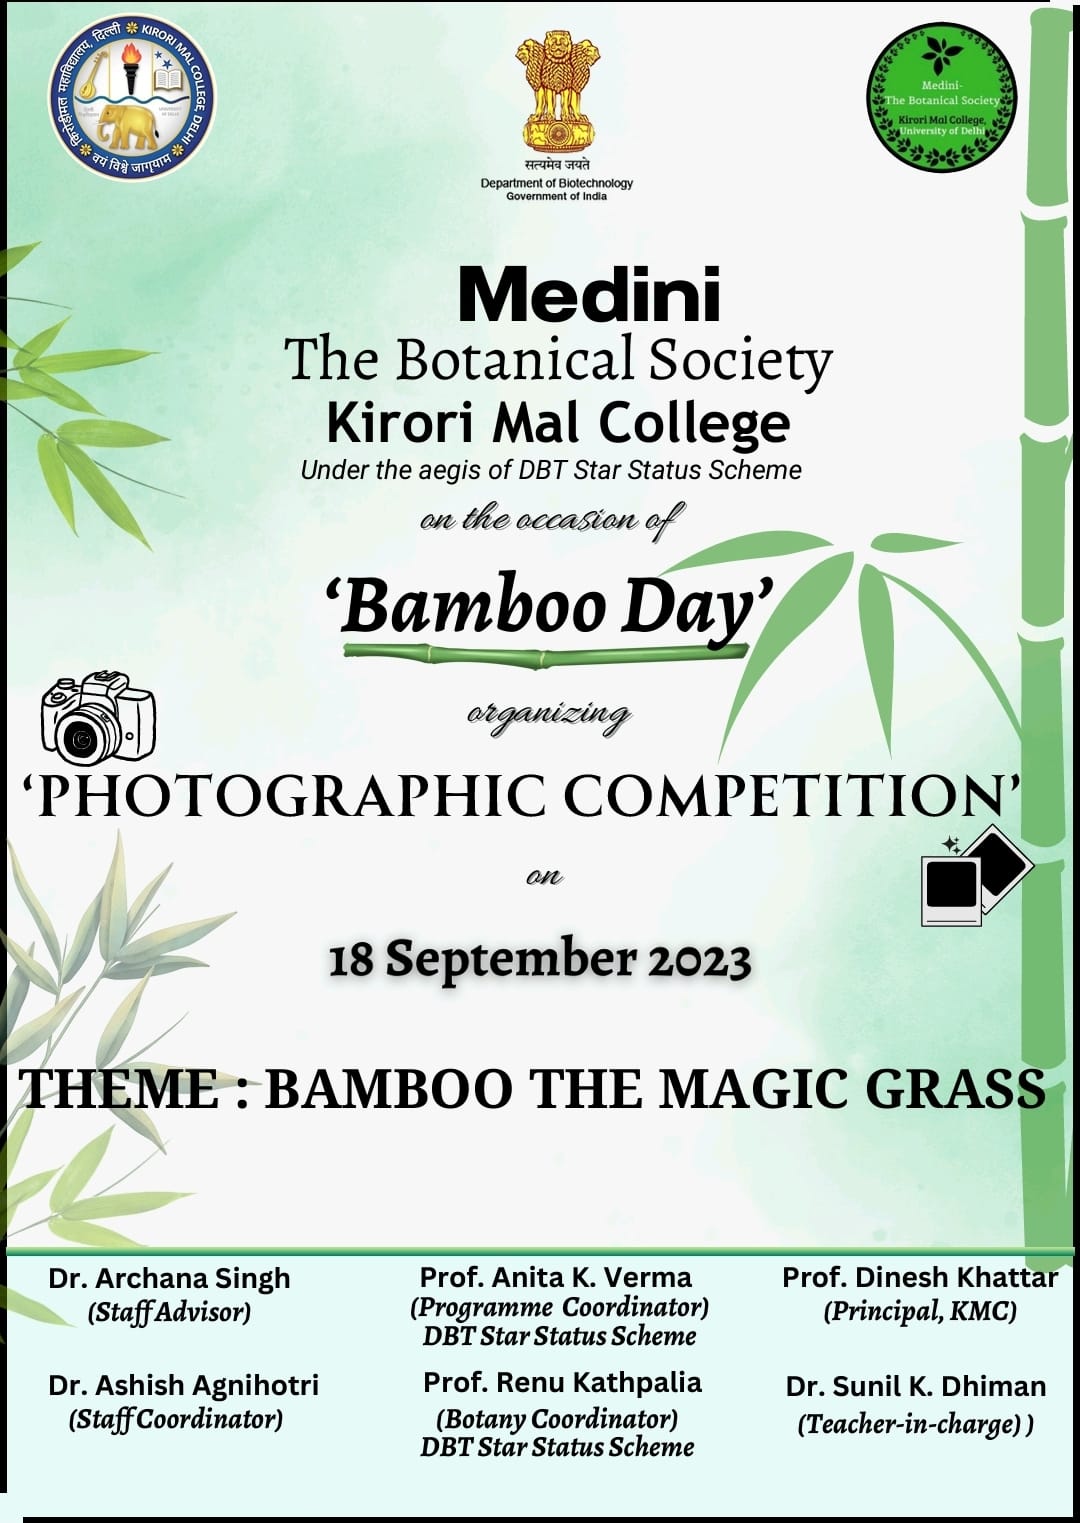 Bamboo Day - Photographic Competition